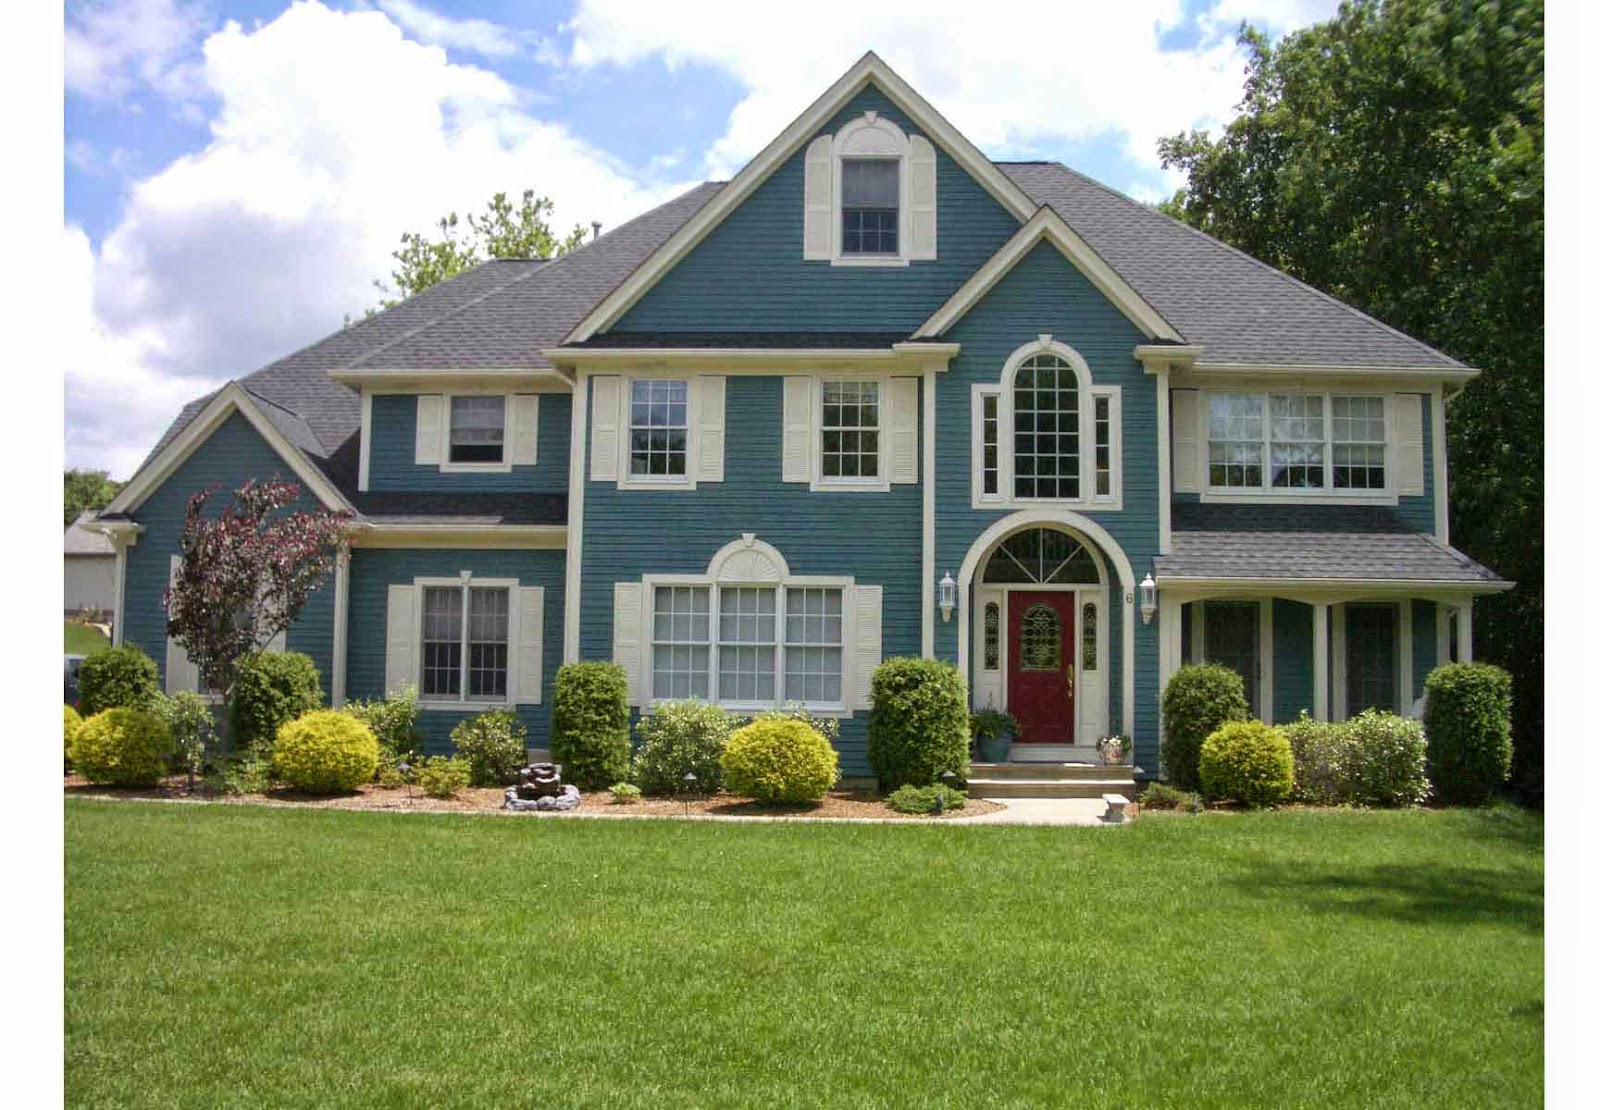 How To Select Exterior And Interior Paint Colors For A Home